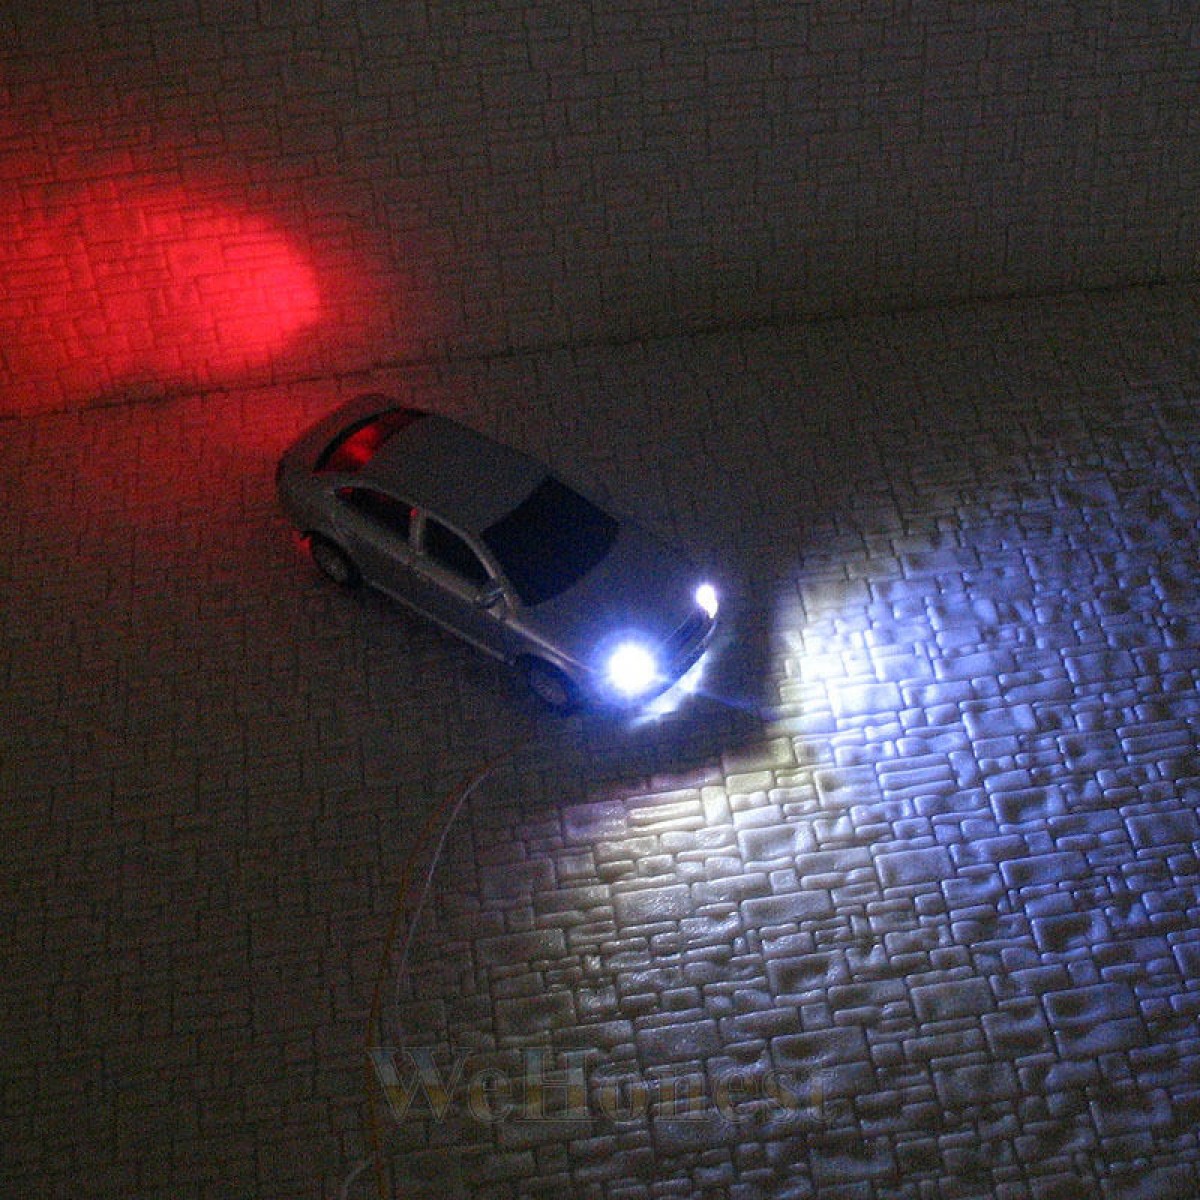     5 pcs OO Scale 1:76  Model  Cars with 12V LEDs lights  (WeHonest)